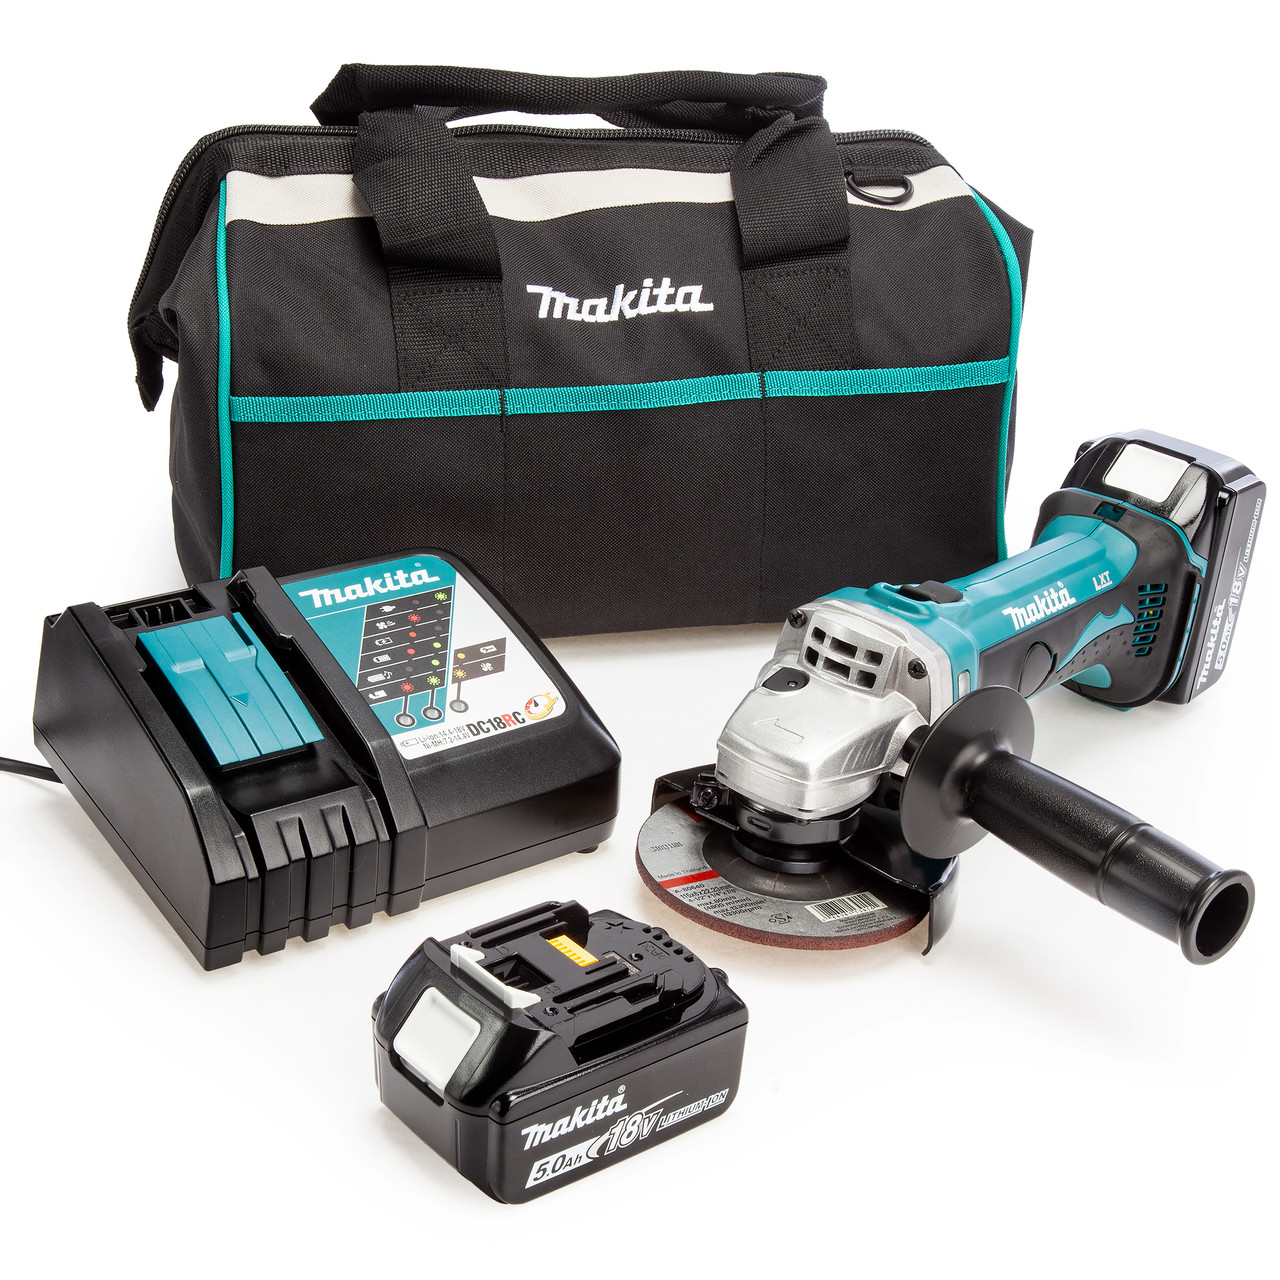 BHTOP Cordless Angle Grinder Lithium Ion-powered 20Volt Charger Brushless 4.5 Including 4.0 Ah Battery,Charger and Carrying Case 4.5 